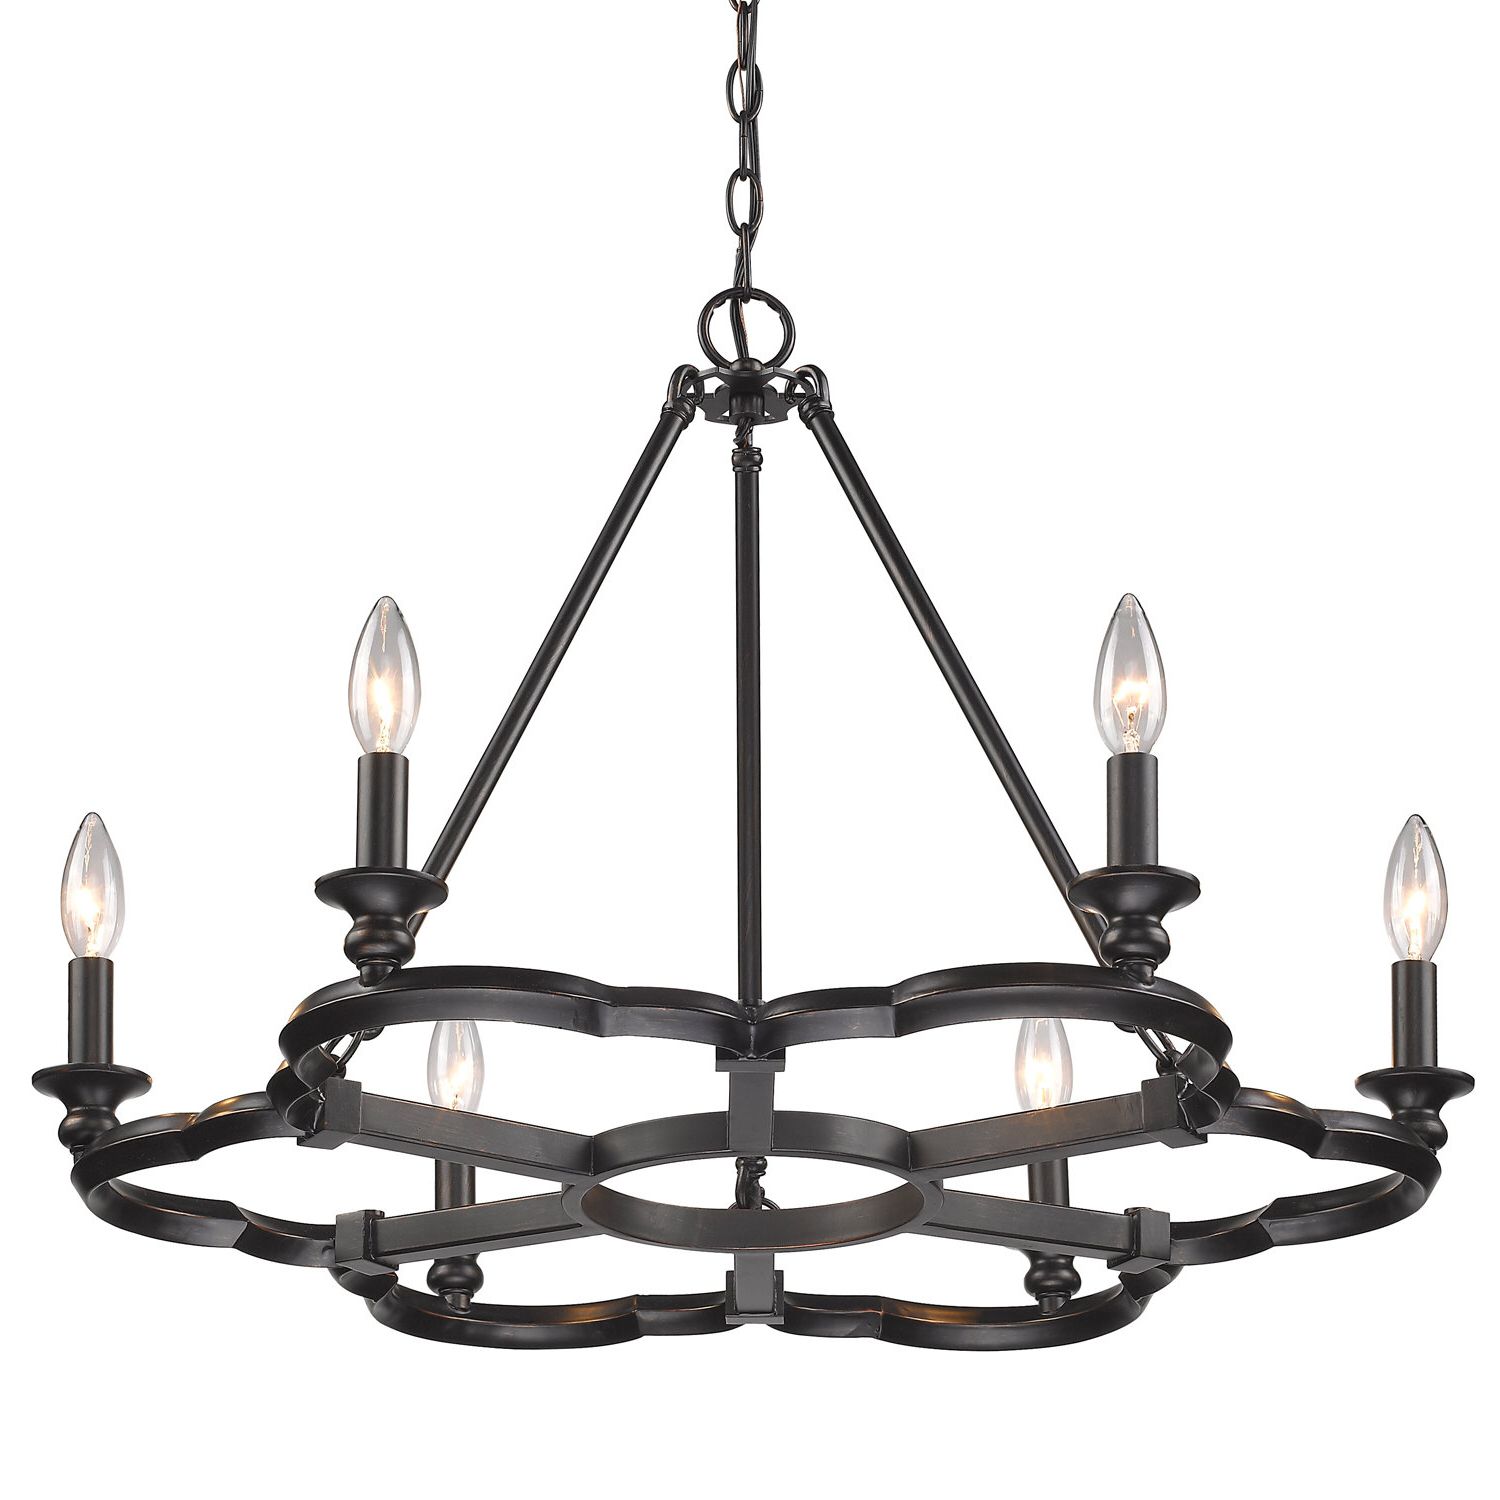 Popular Perseus 6 Light Candle Style Chandeliers Within Stephania 6 Light Candle Style Chandelier (View 11 of 25)